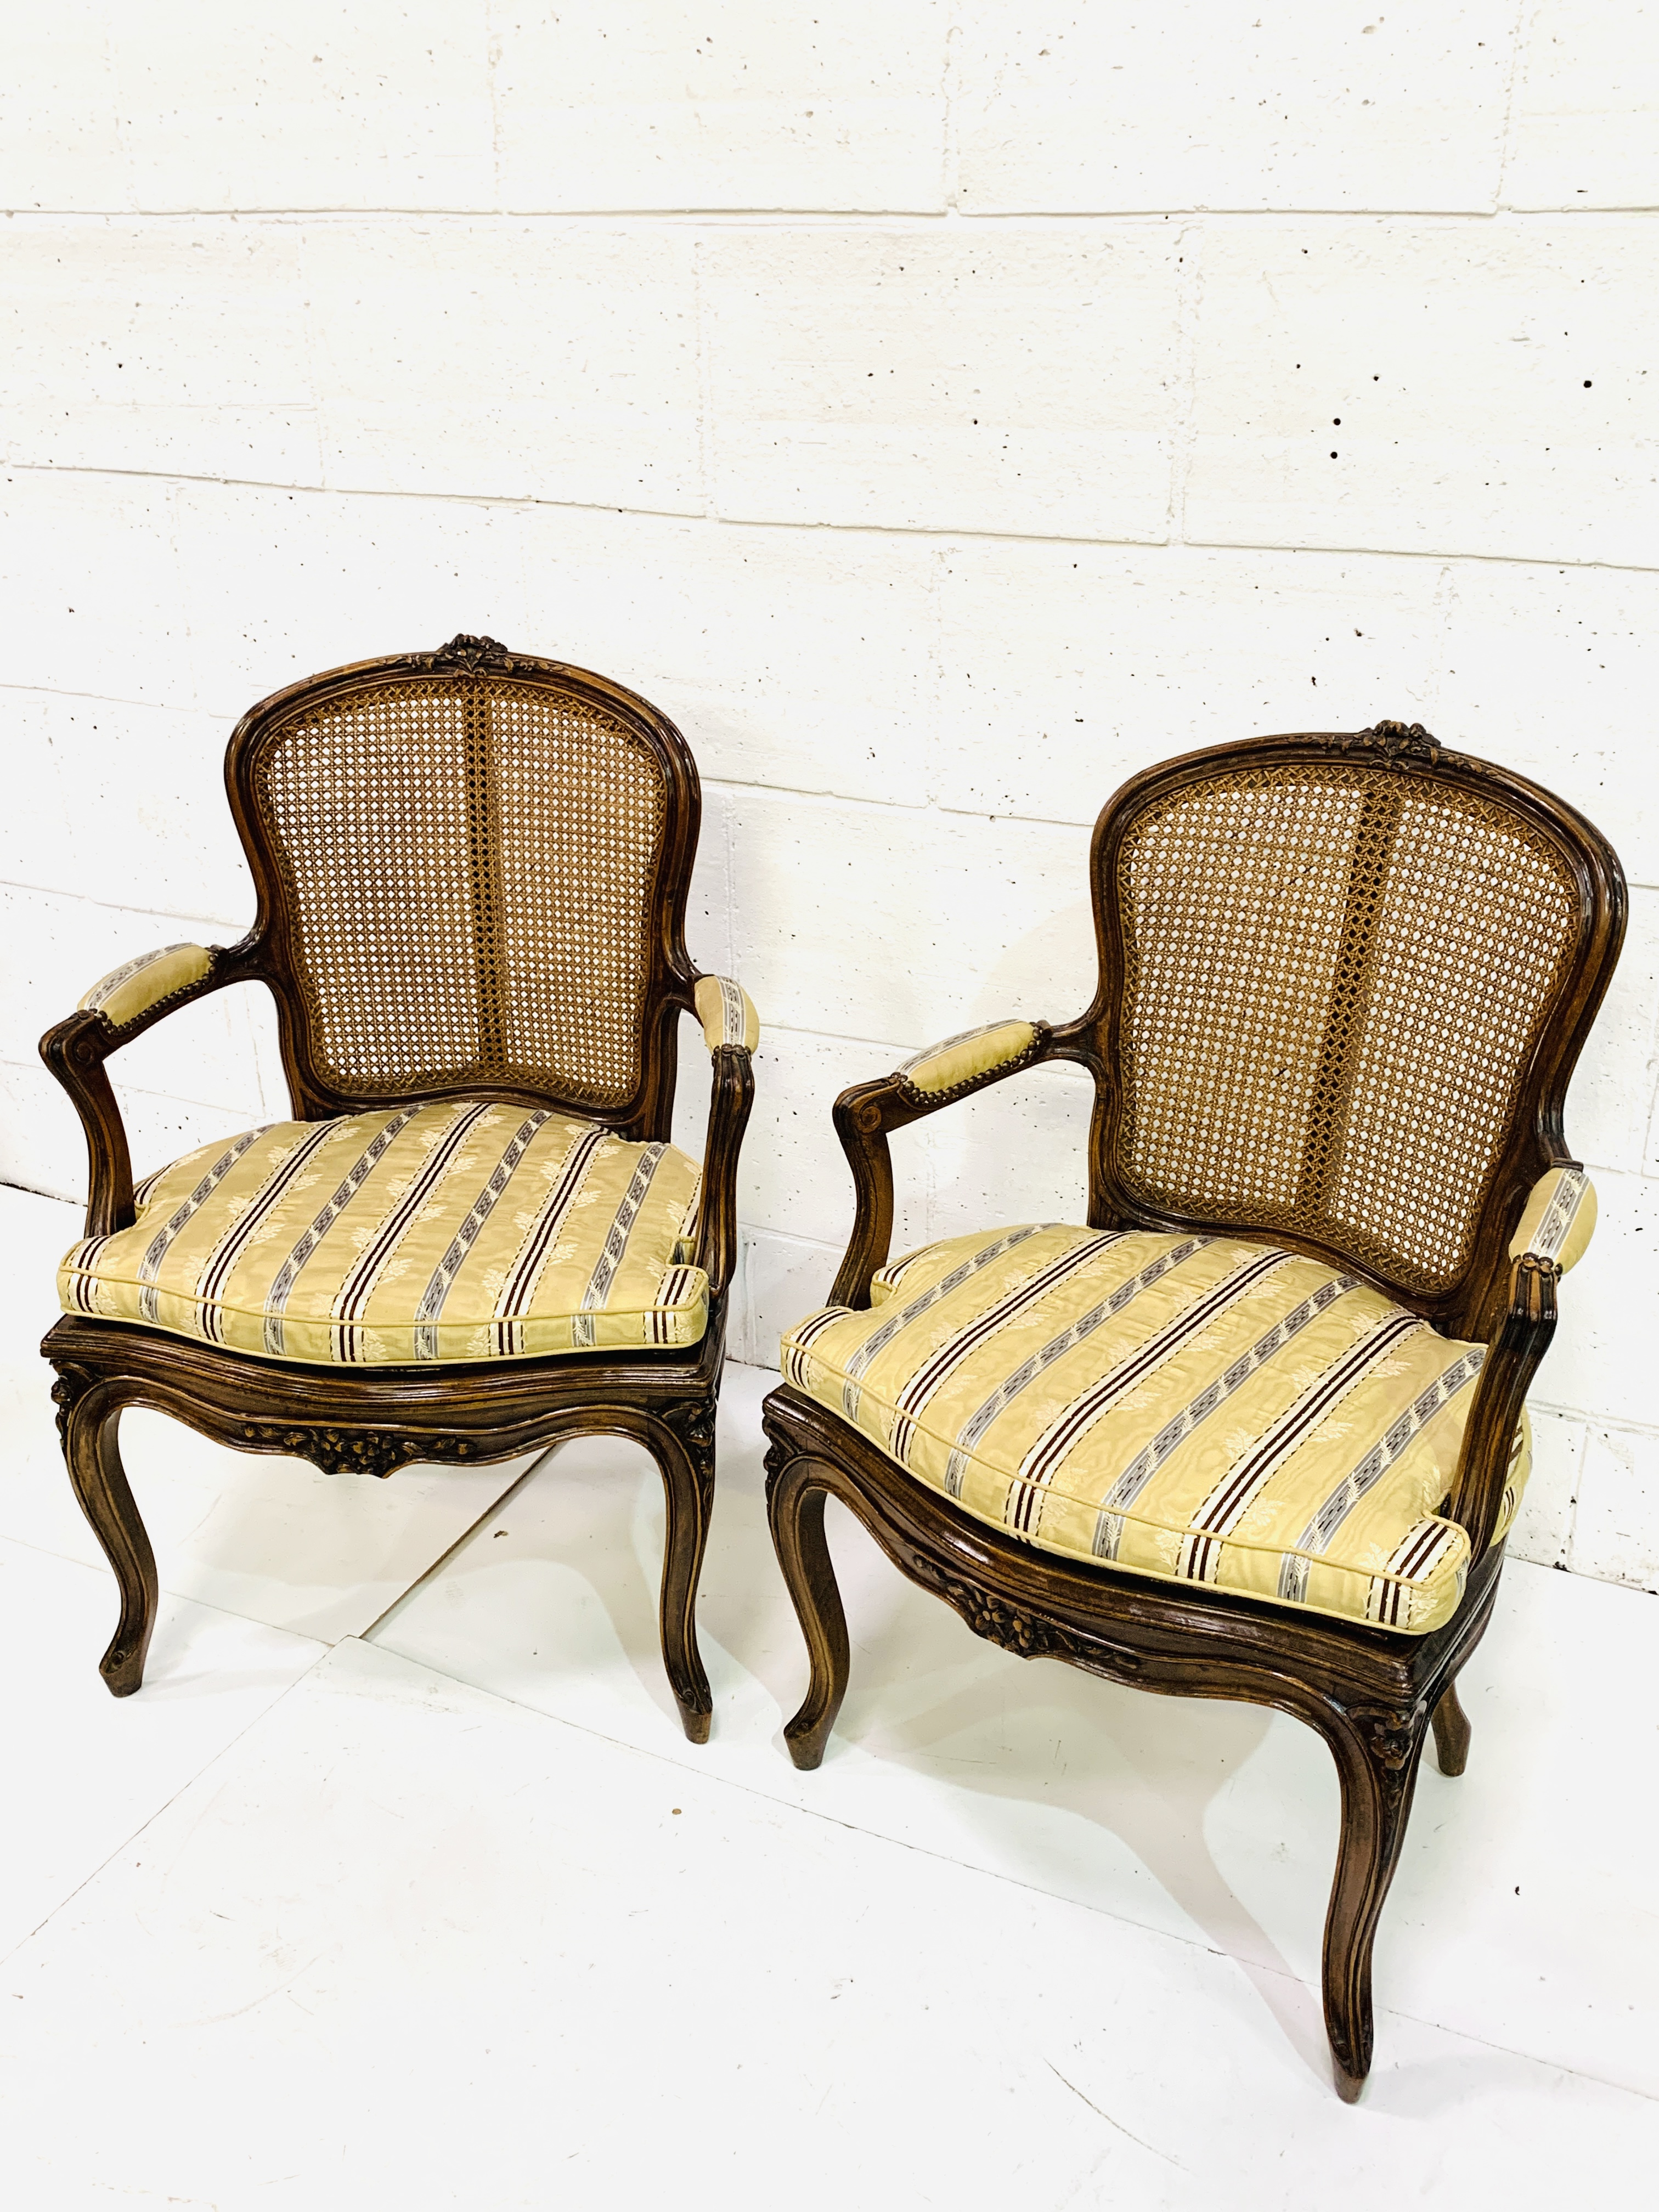 Pair of French style open arm chairs - Image 2 of 5